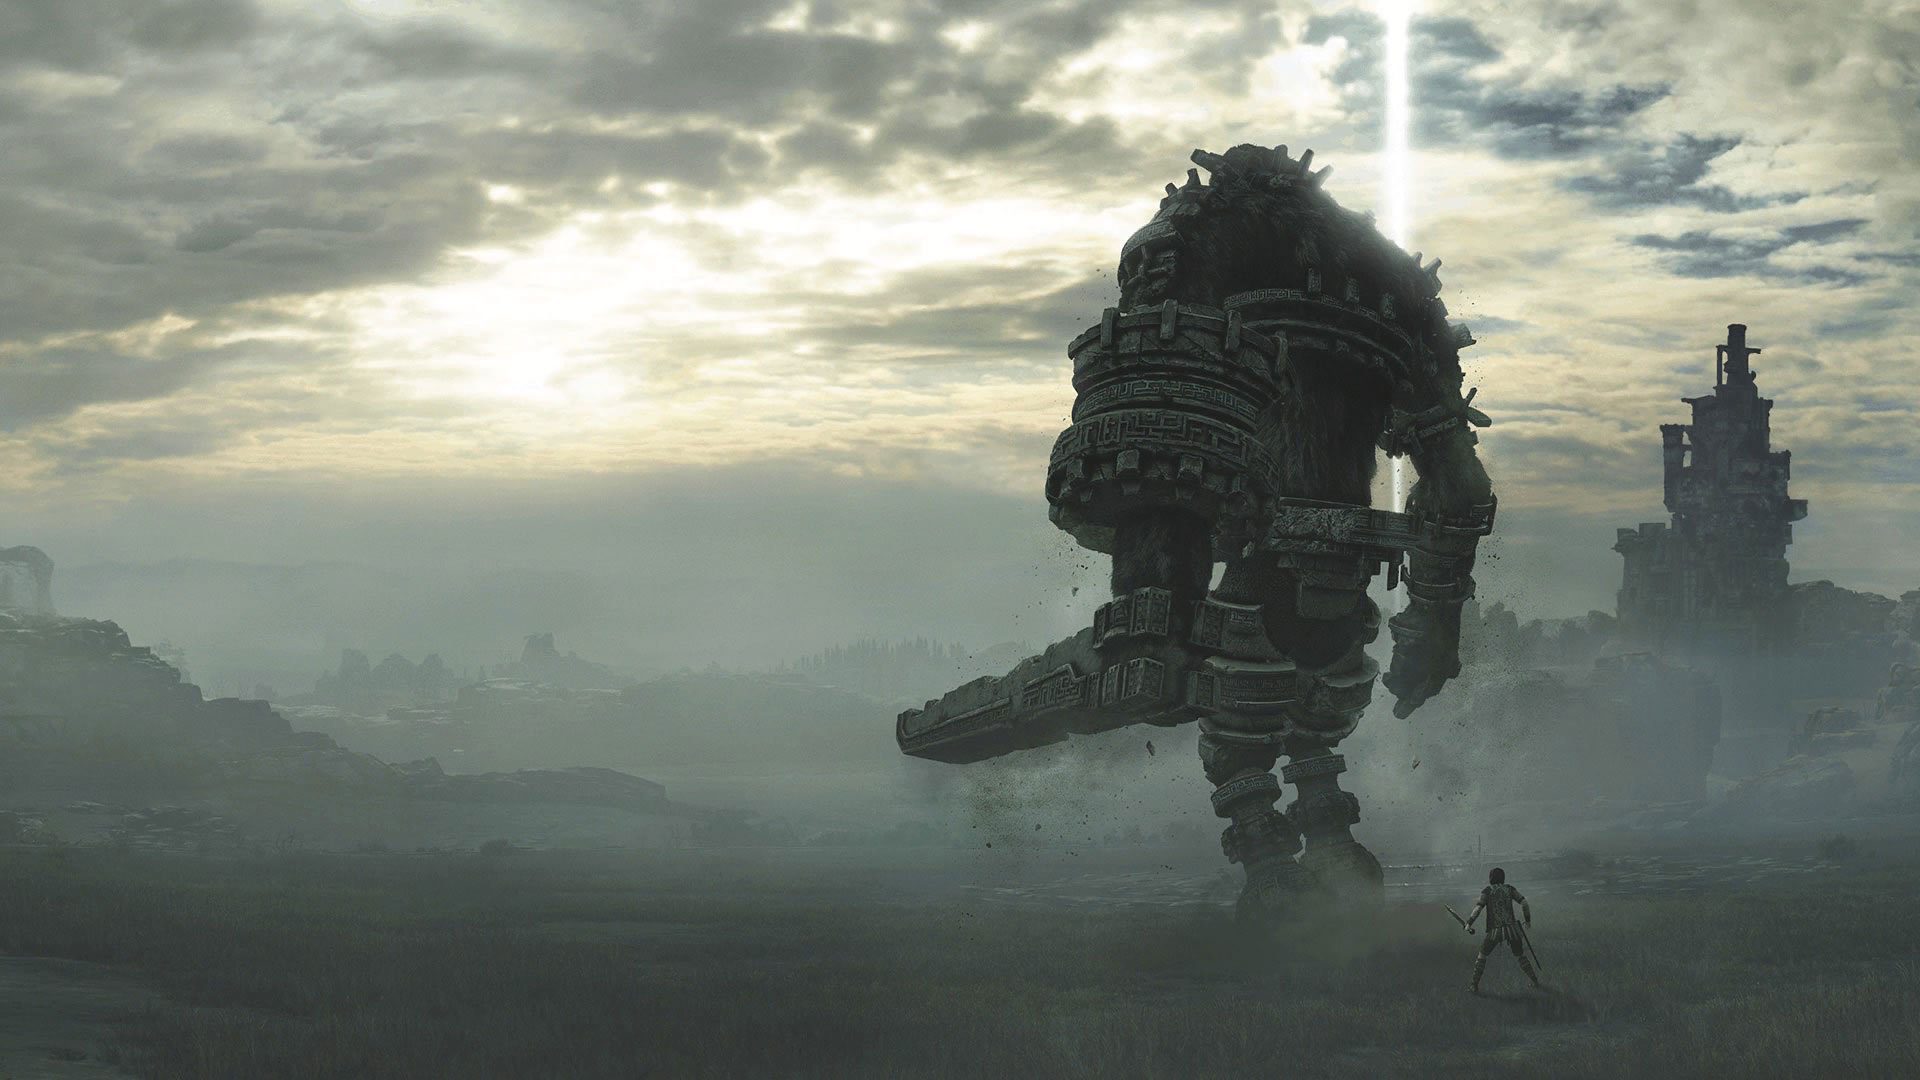 Shadow of the Colossus design analysis